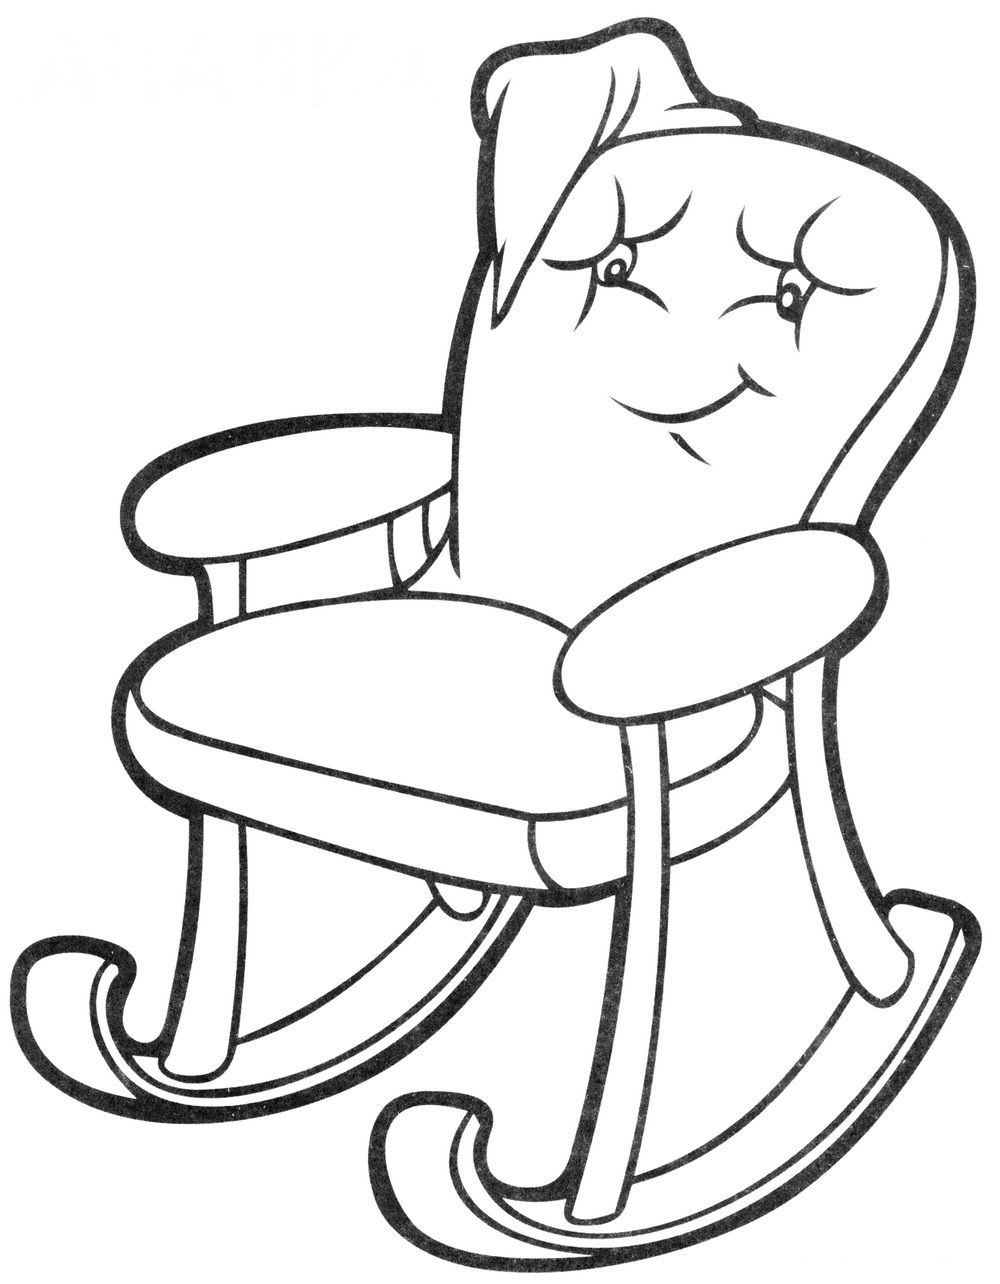 Furniture coloring page for kids to print and download for free